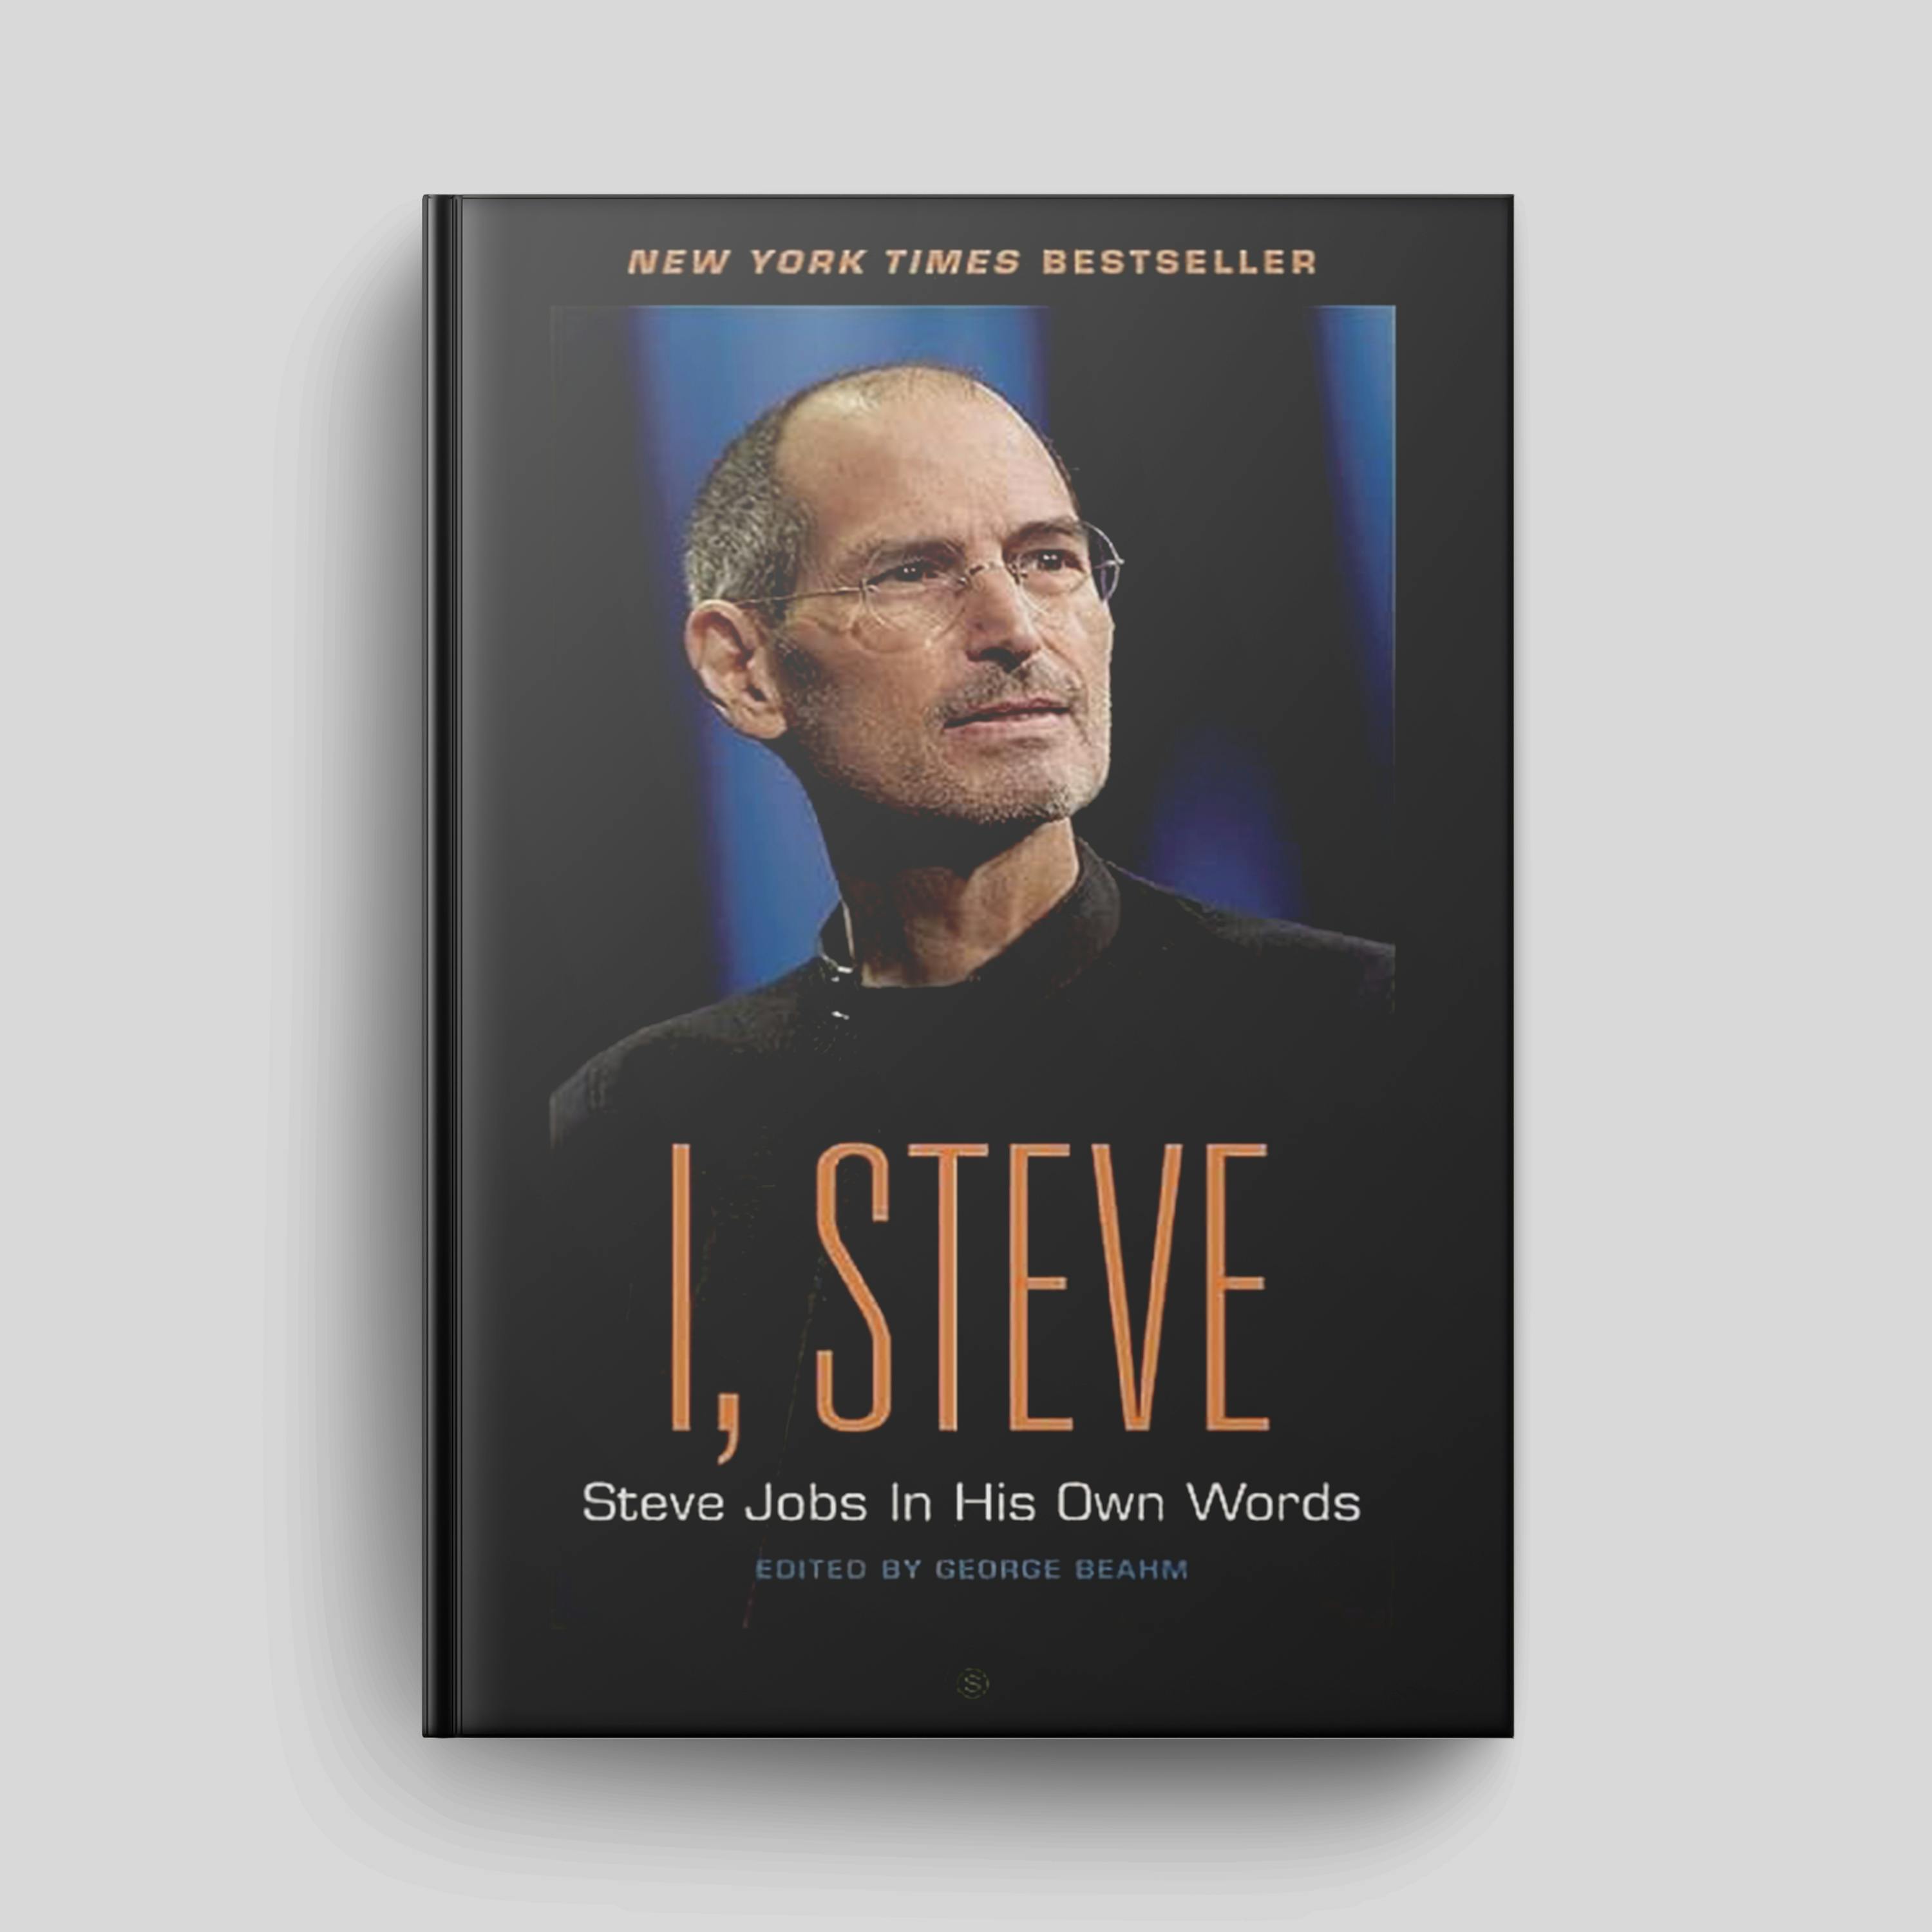 Trailer - Book: ”I, Steve: Steve Jobs in his Own Words” by George Beahm | Episode #172